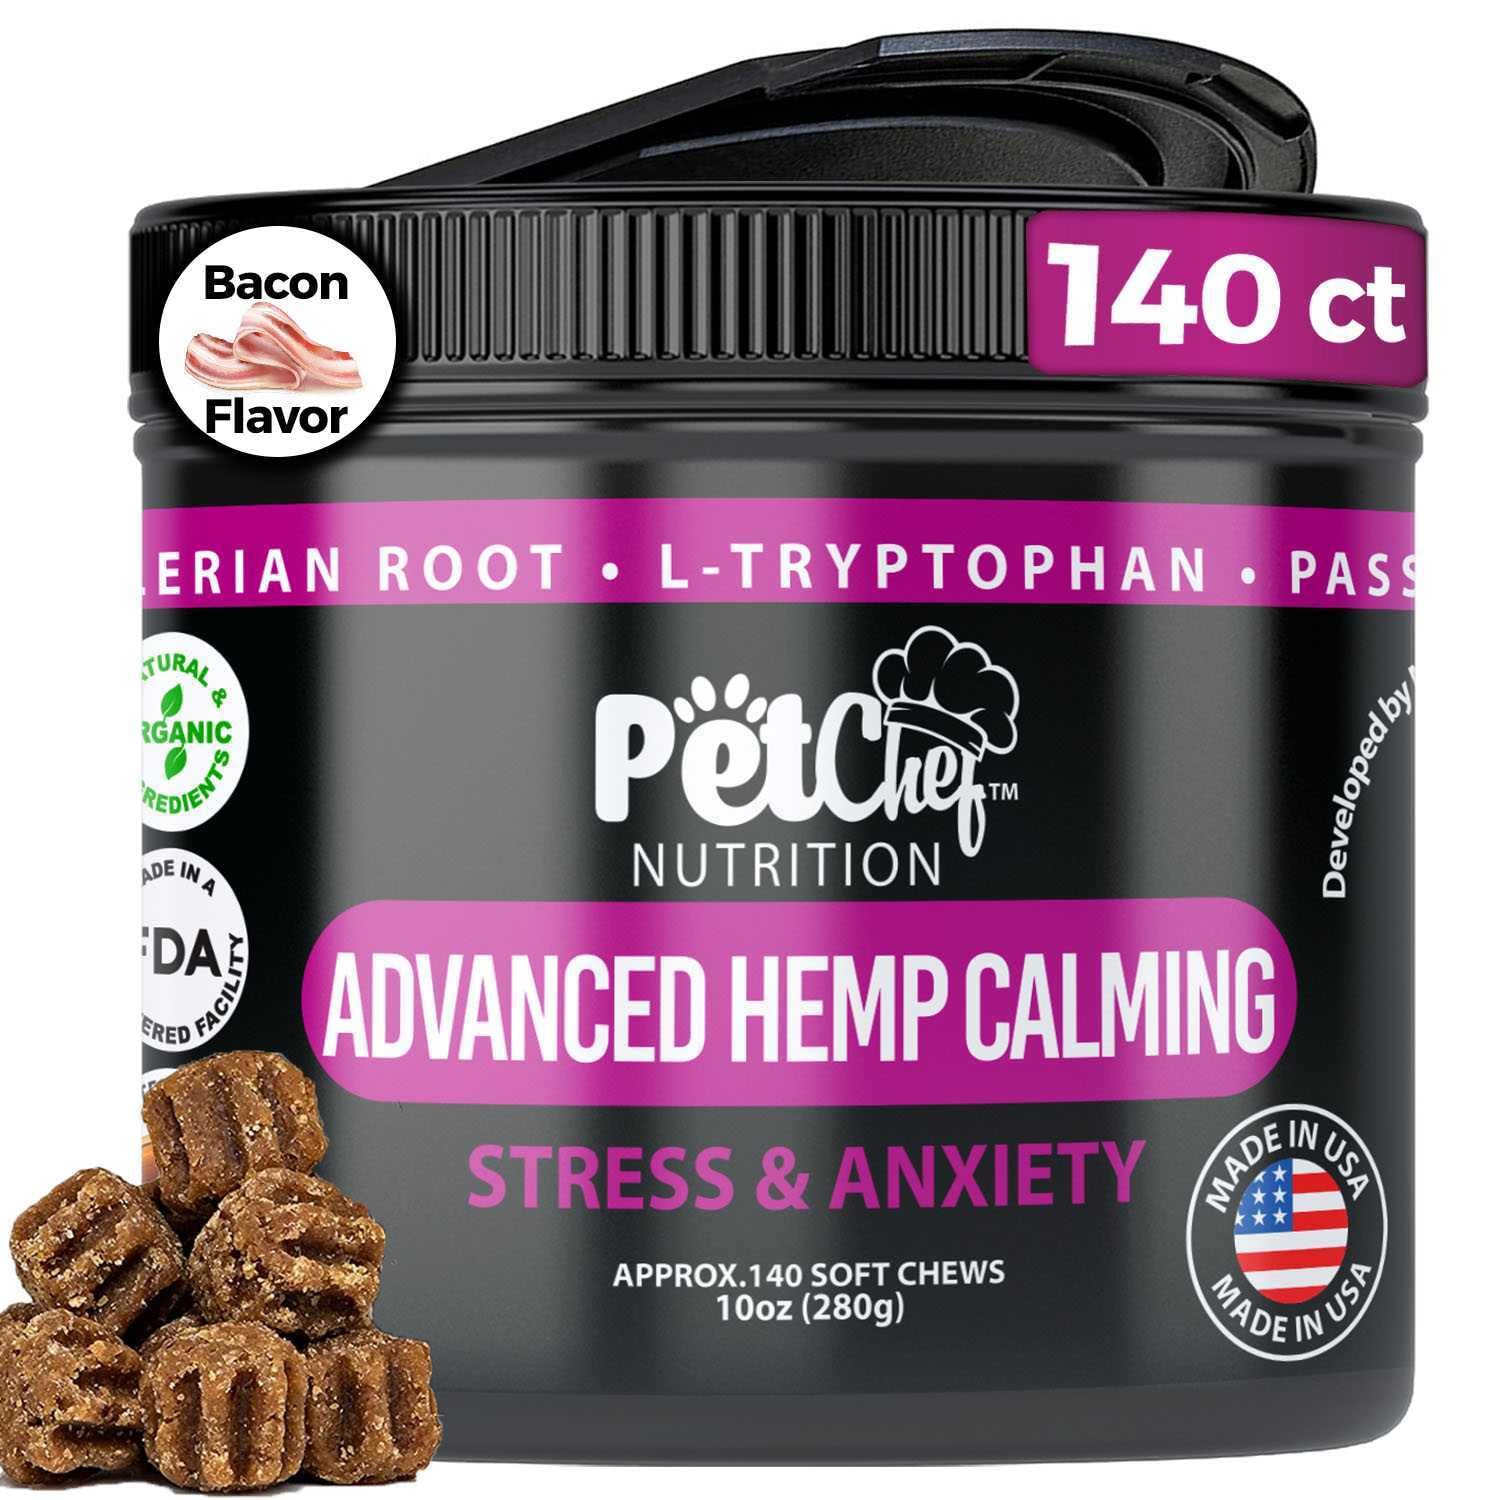 Natural Hemp Calming Chews for Dogs - Separation Anxiety, Hyperactivity, Stress & Pain Relief - Roasted Bacon Flavor - Pop Top Lid - Made in USA - 140 Count